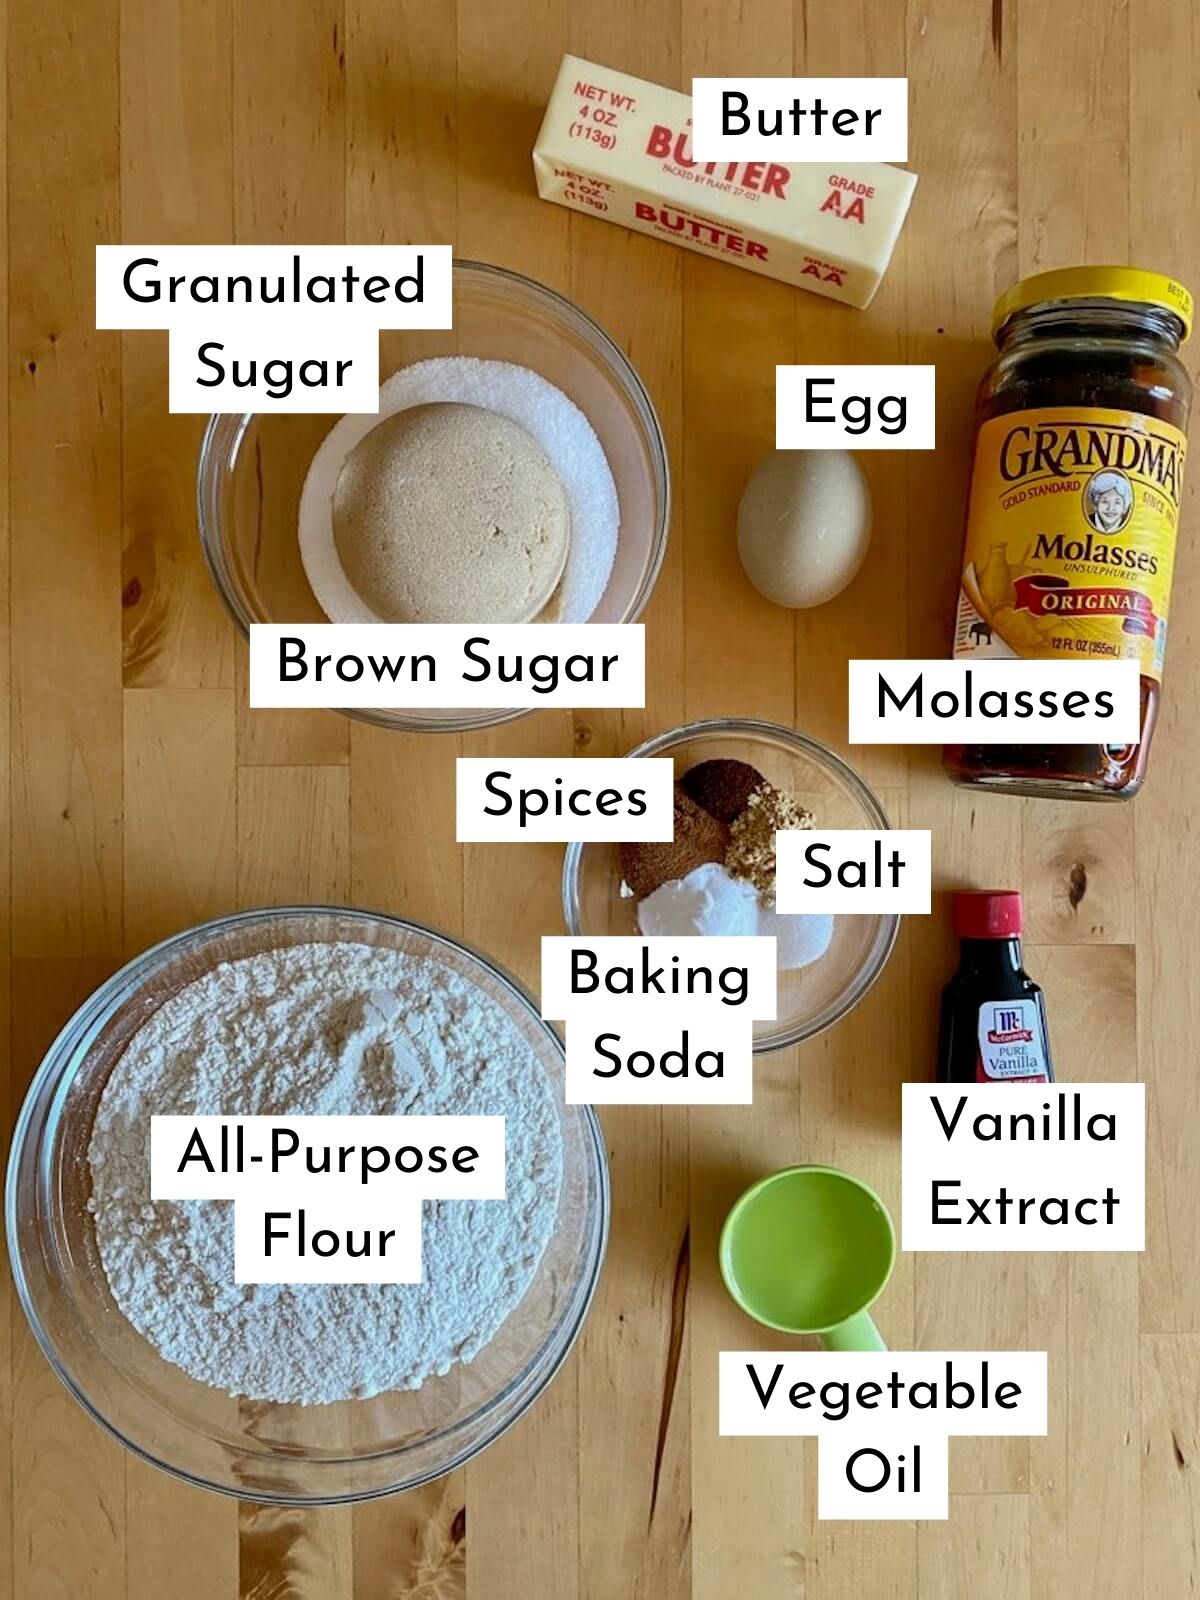 The ingredients to make molasses crinkle cookies. They're labeled with text stating what each ingredient is. They include butter, granulated sugar, brown sugar, egg, molasses, spices, salt, baking soda, all-purpose flour, vanilla extract, and vegetable oil.